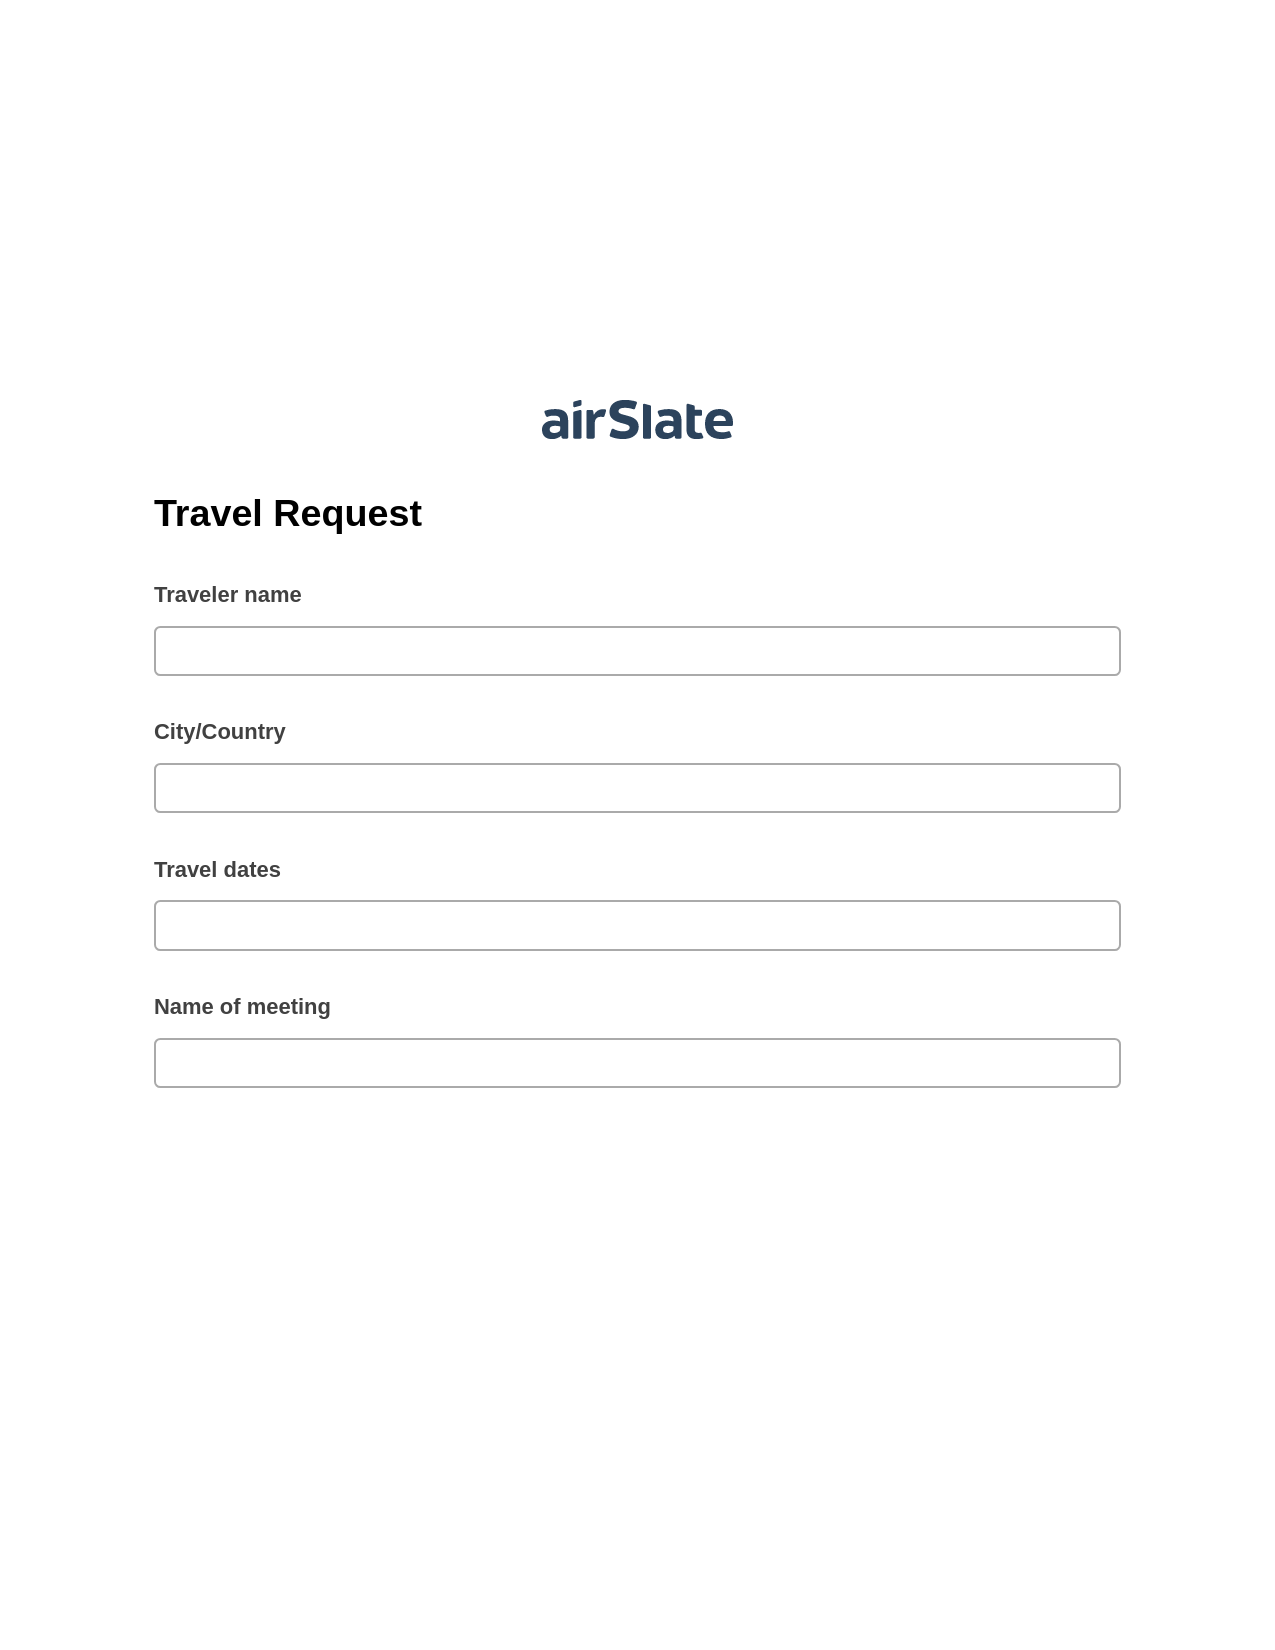 Travel Request Pre-fill Dropdowns from Excel Bot, Create slate addon, Export to MySQL Bot